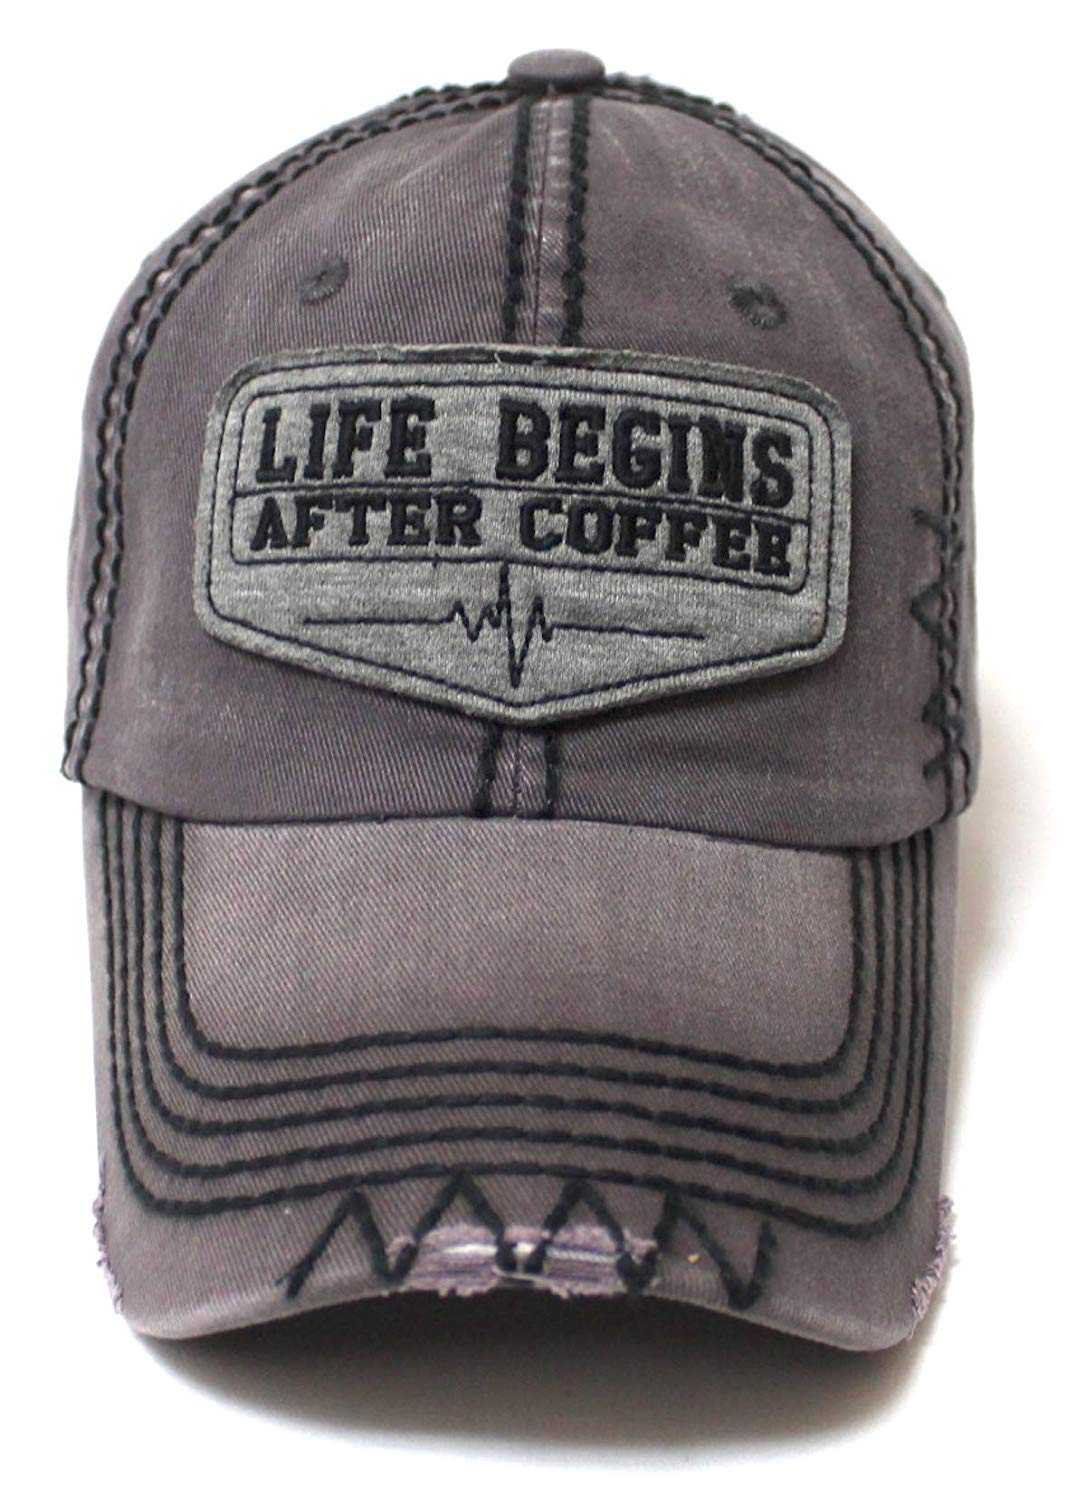 Classic Varsity Ball Cap Life Begins After Coffee Patch Embroidery Hat, Vintage Grey - Caps 'N Vintage 